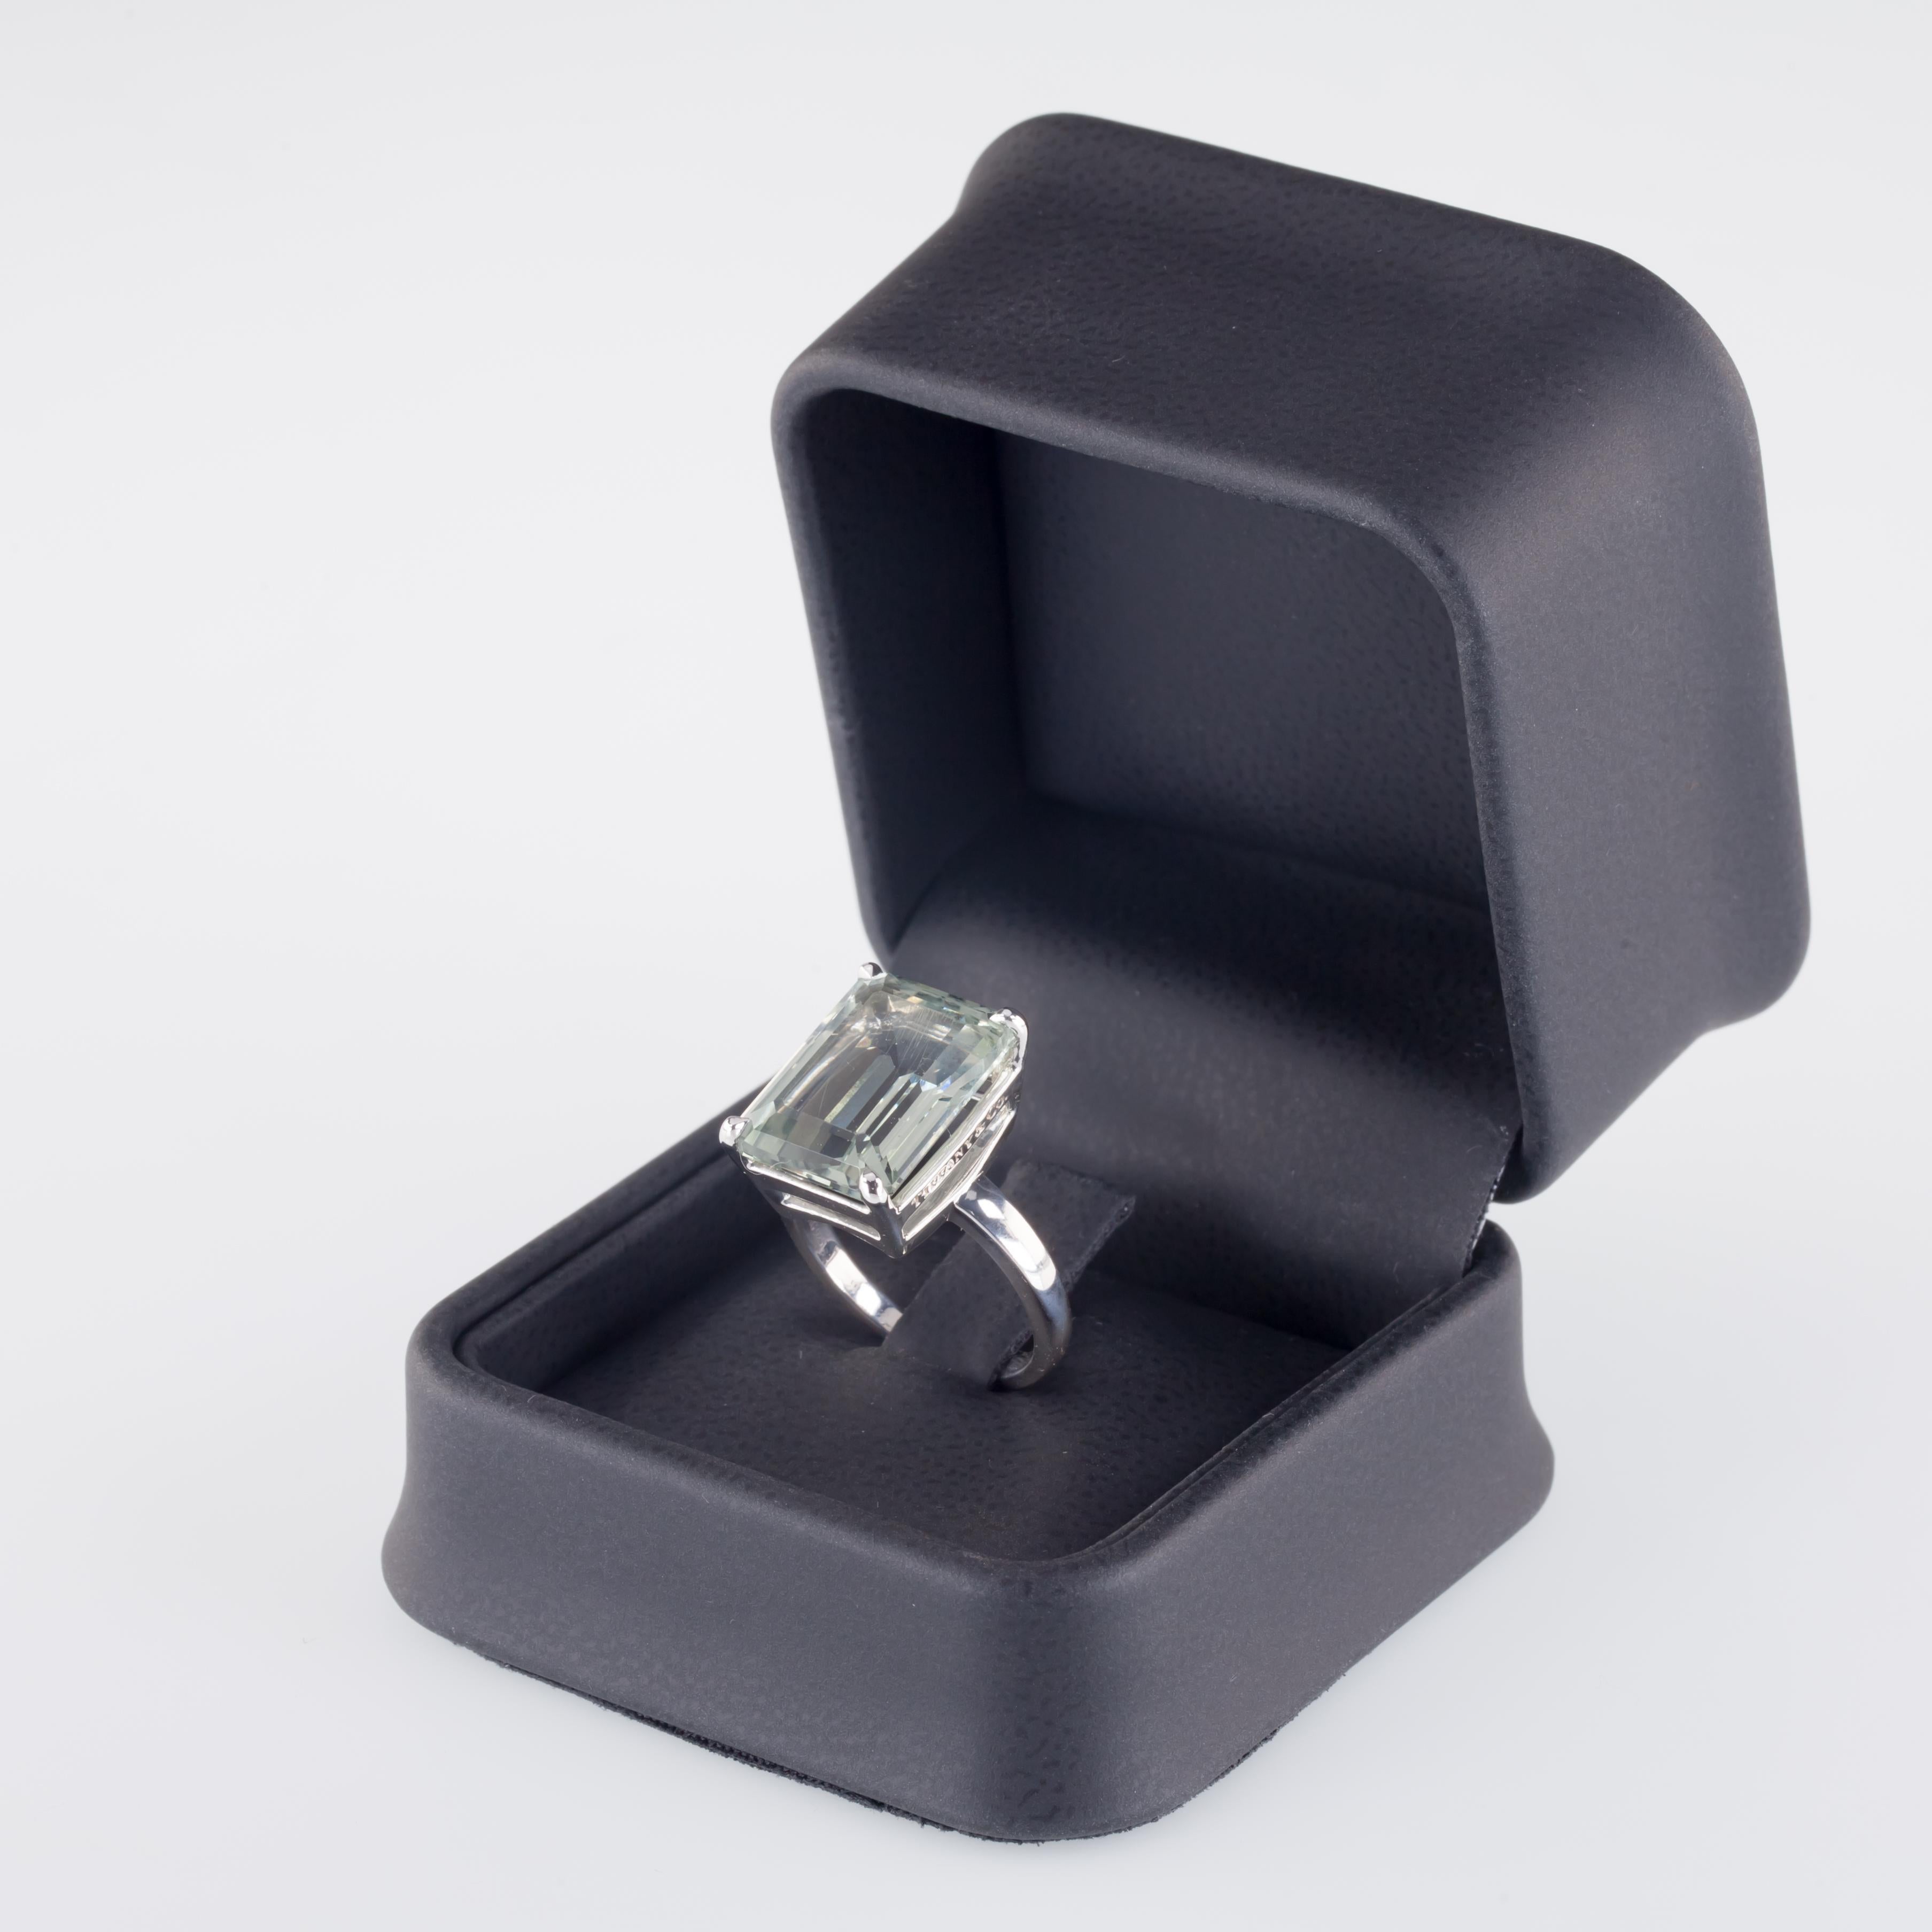 Gorgeous Sparklers Cocktail Ring by Tiffany & Co.
Features Large Prong Set Emerald Cut Green Quartz
Dimensions of Quartz = 16 mm x 12 mm
Ring is Size 7
Hallmarked 